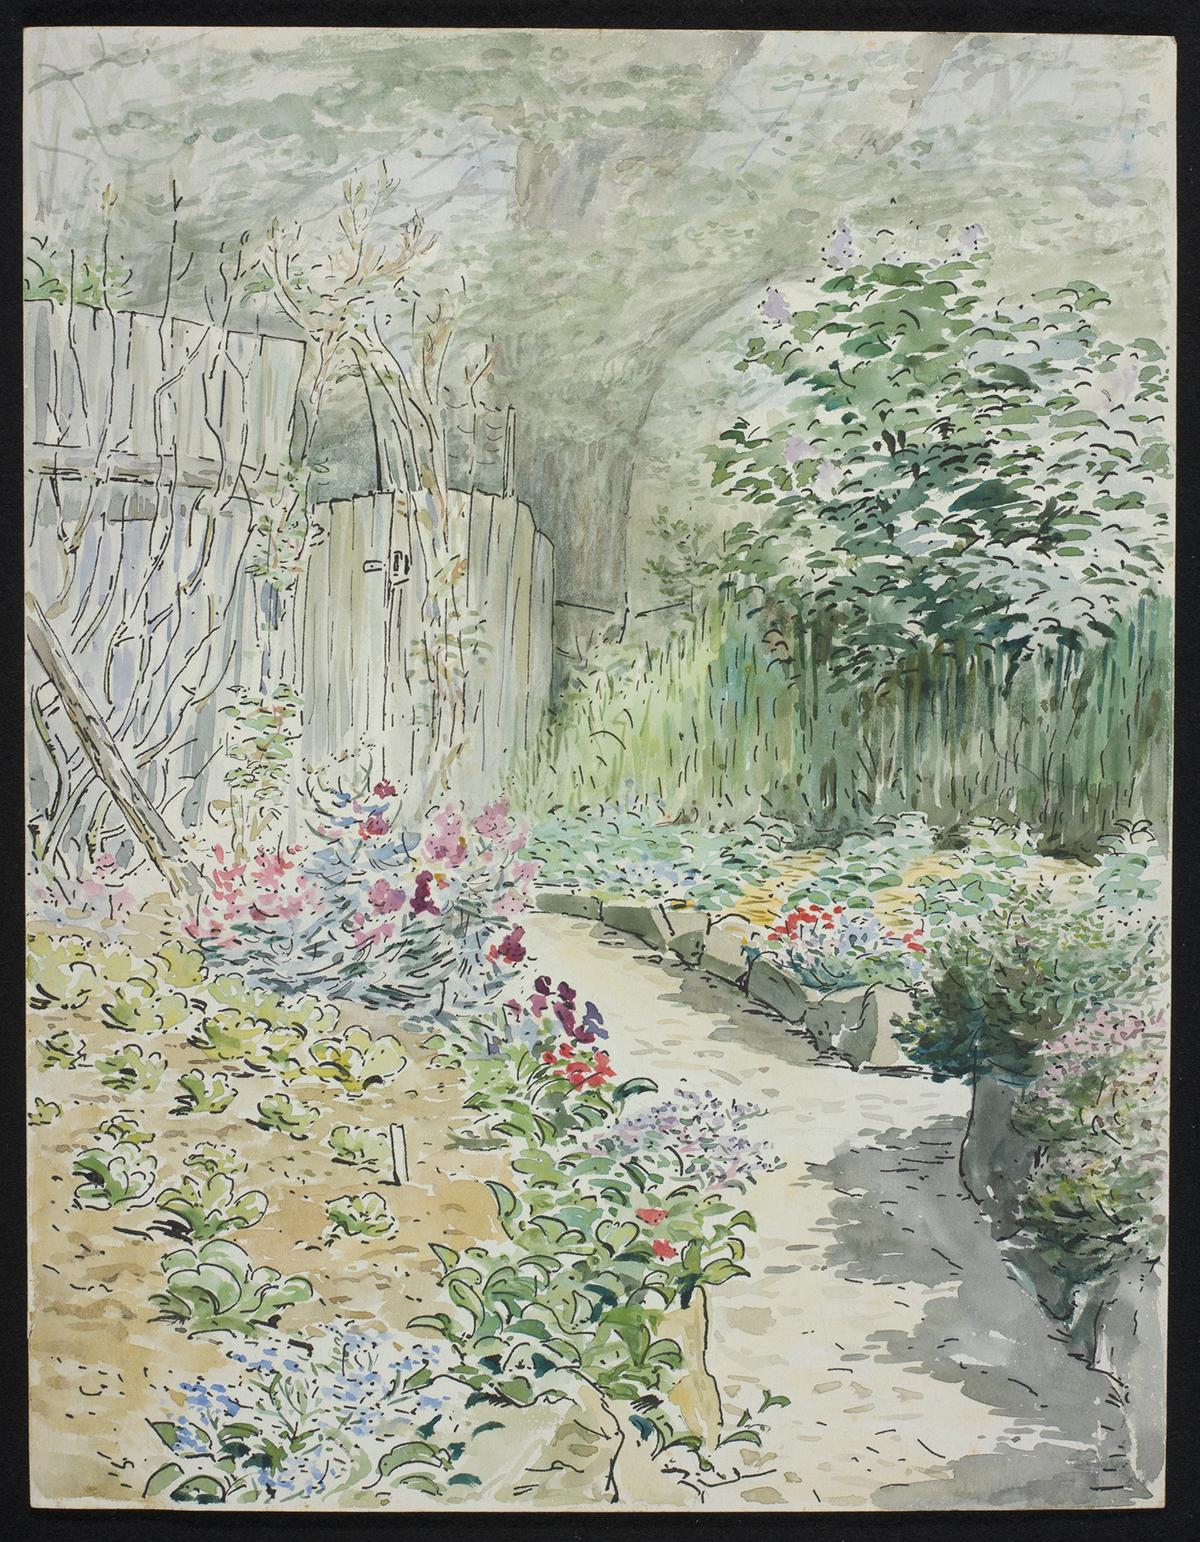 Potter's illustration of Spring in Harescombe Grange, Gloucestershire, circa 1903, by Beatrix Potter. © Victoria and Albert Museum, London. (Courtesy of The Morgan Library & Museum)